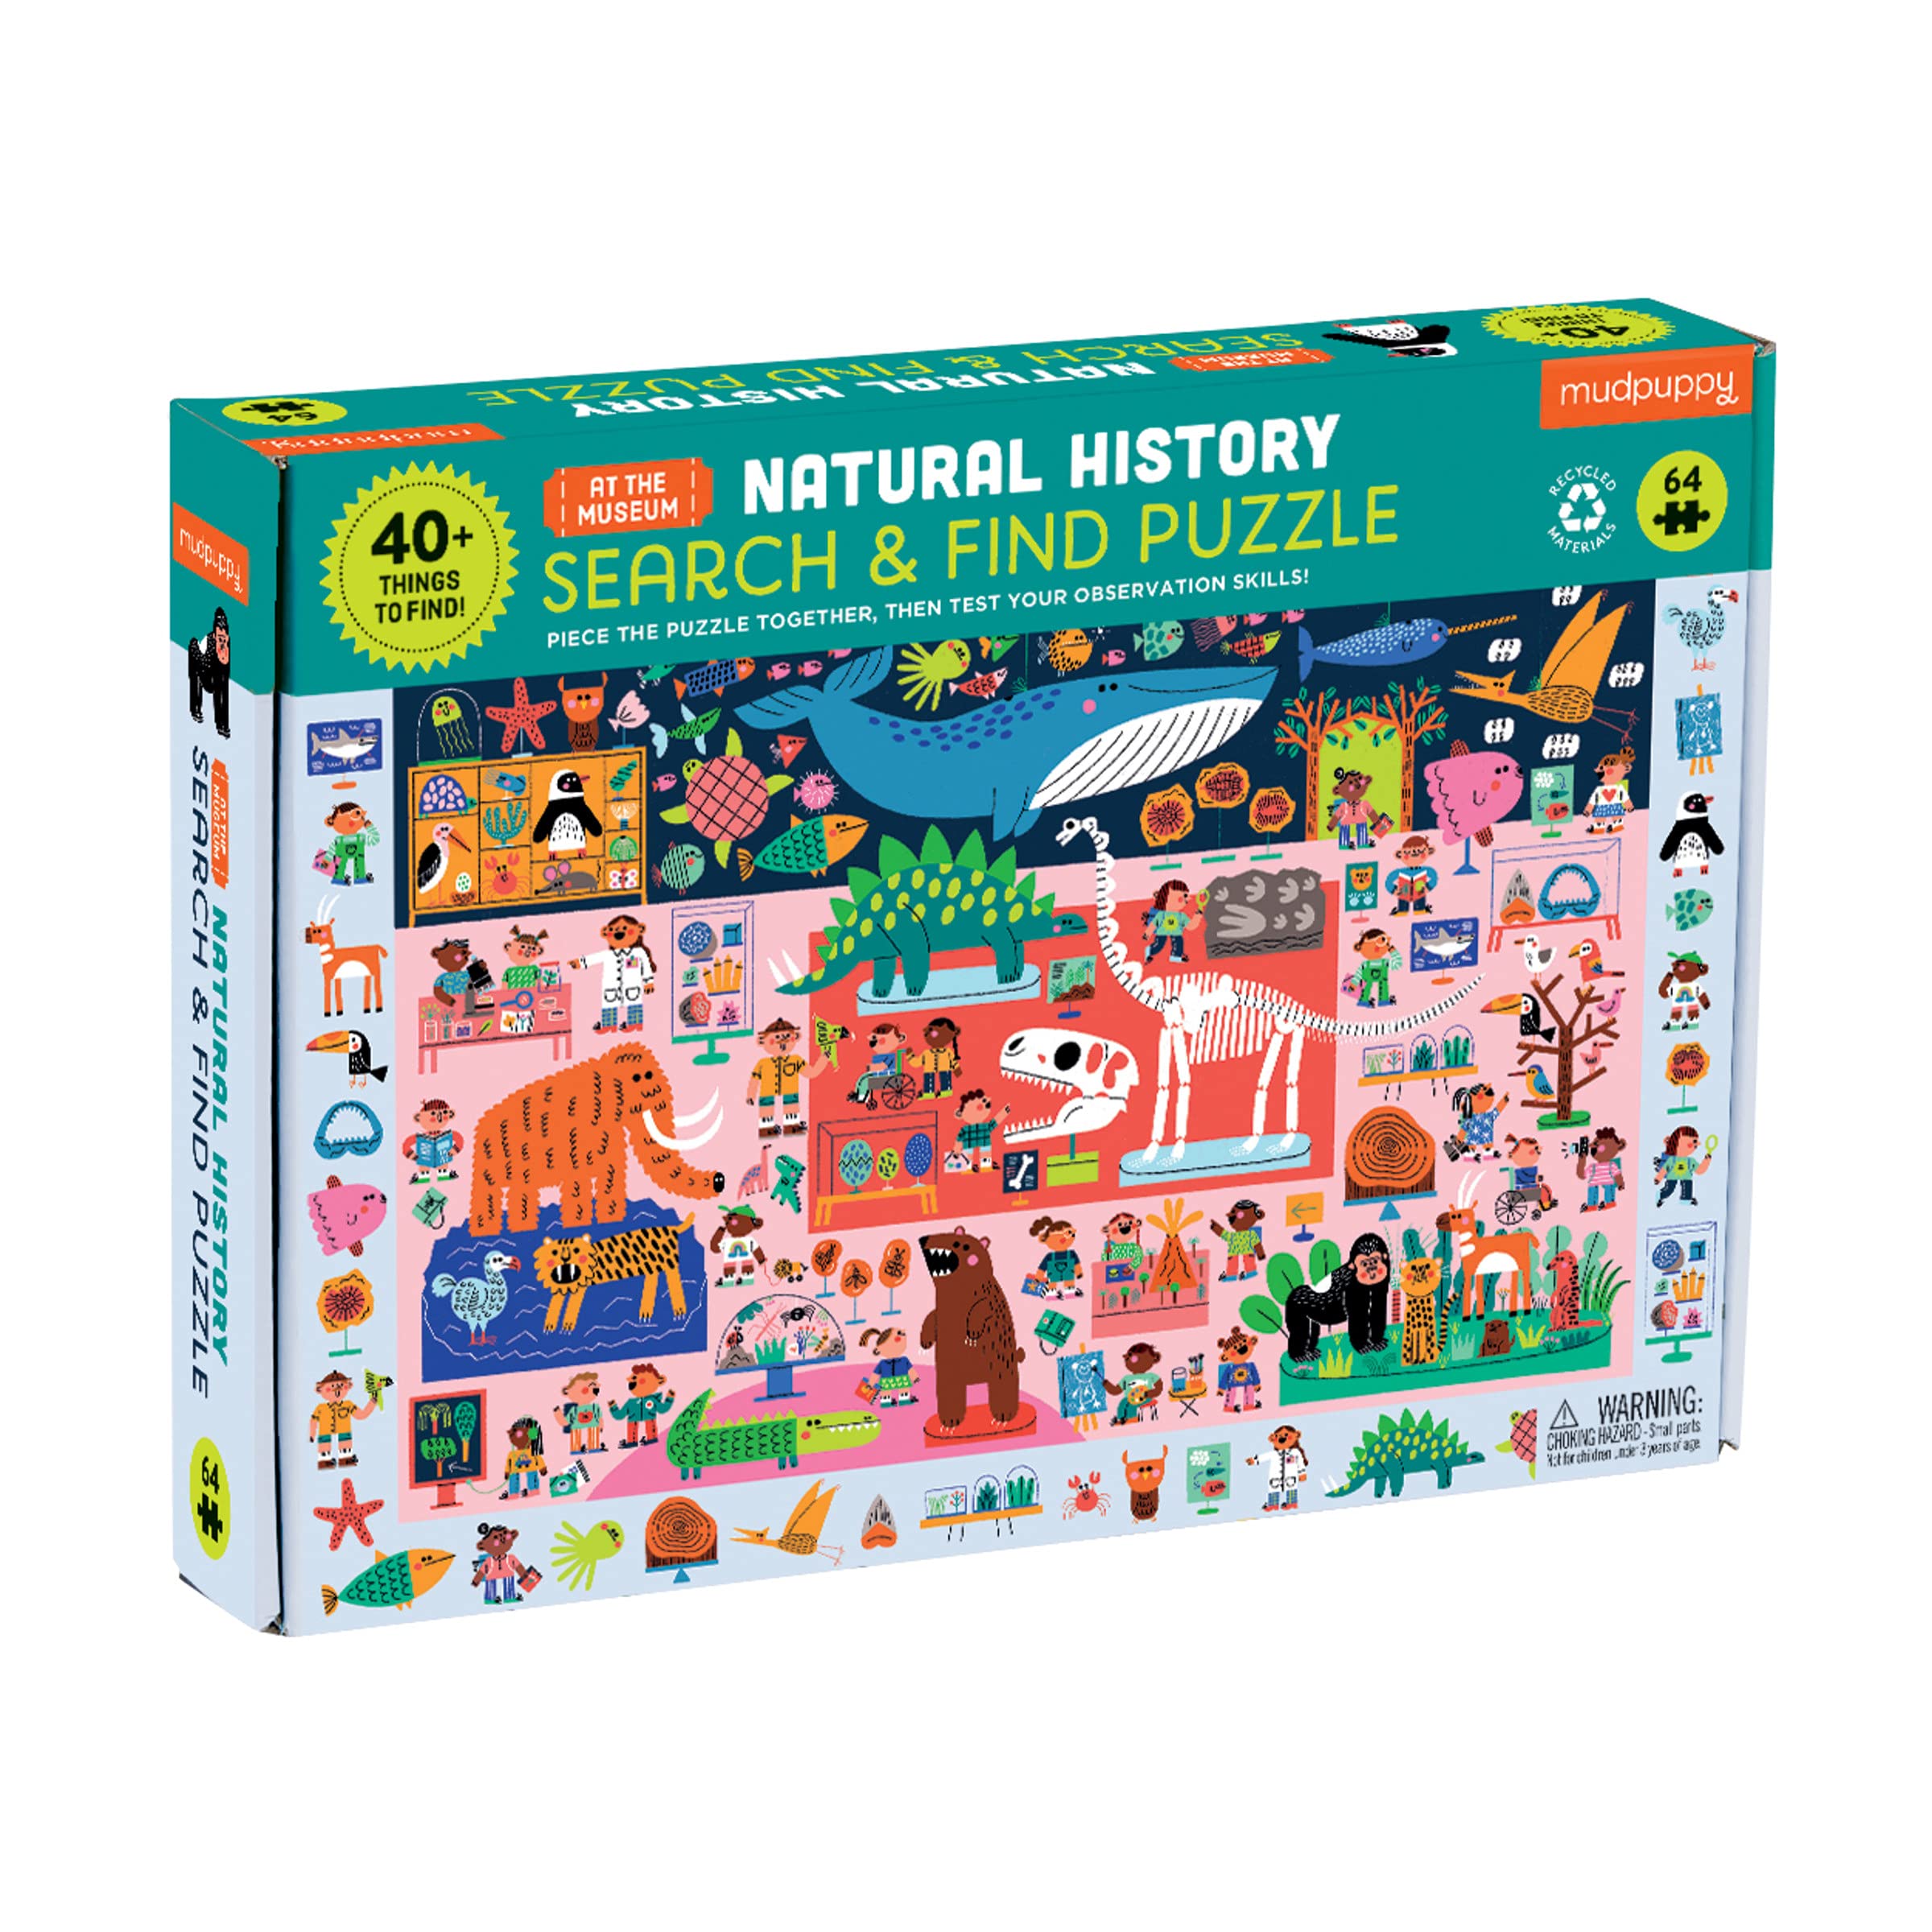 Mudpuppy Natural History Museum Search & Find Puzzle from Colorful Illustrations, Complete Puzzle to Find 40+ Hidden Images, Fun and Challenging for Kids Ages 4-7, Makes a Great Gift